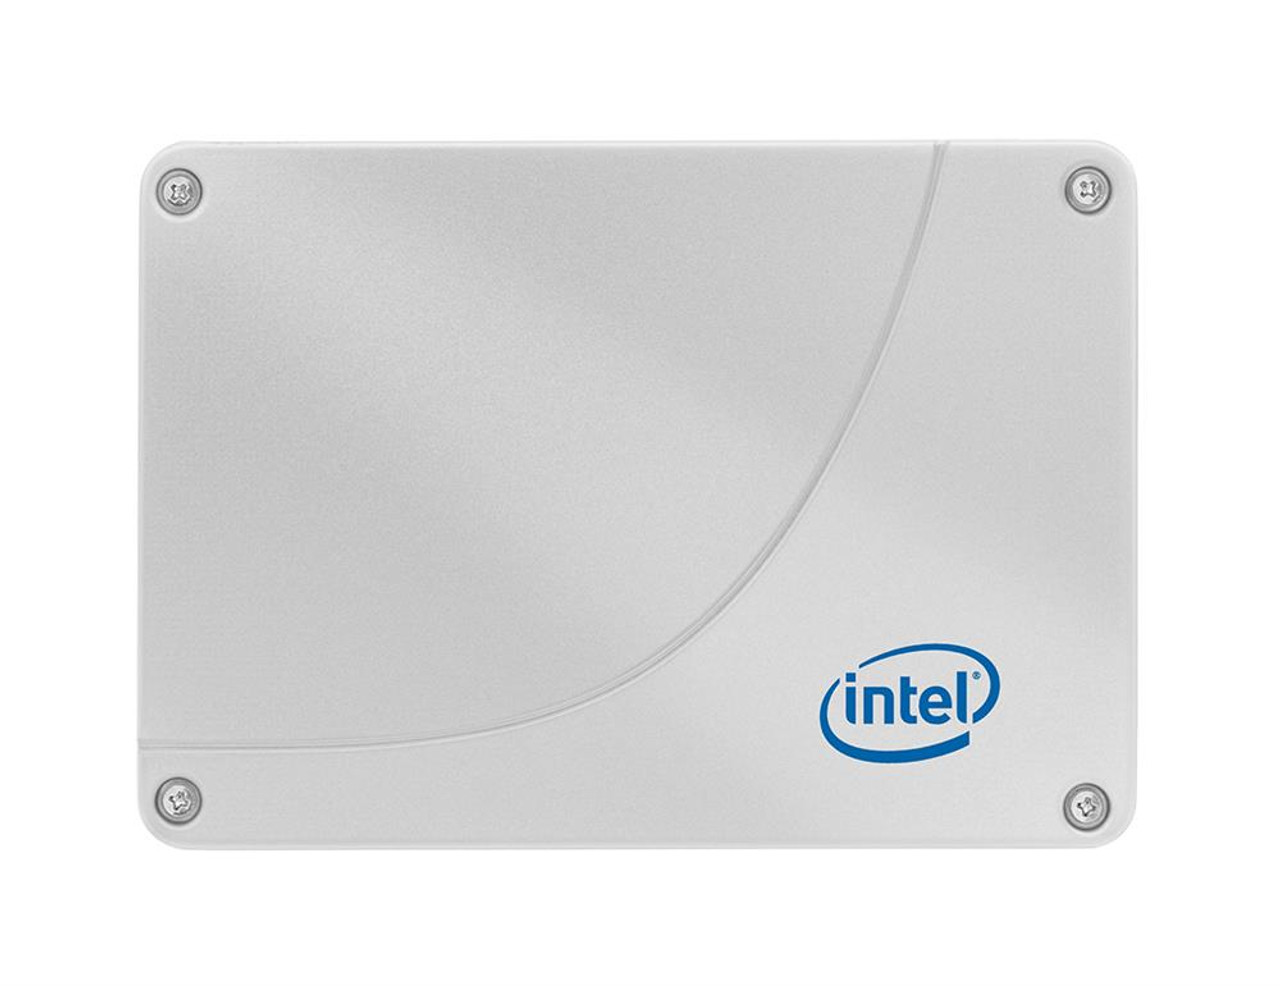 1356245 Intel 520 Series 120GB MLC SATA 6Gbps (AES-128) 2.5-inch Internal Solid State Drive (SSD)